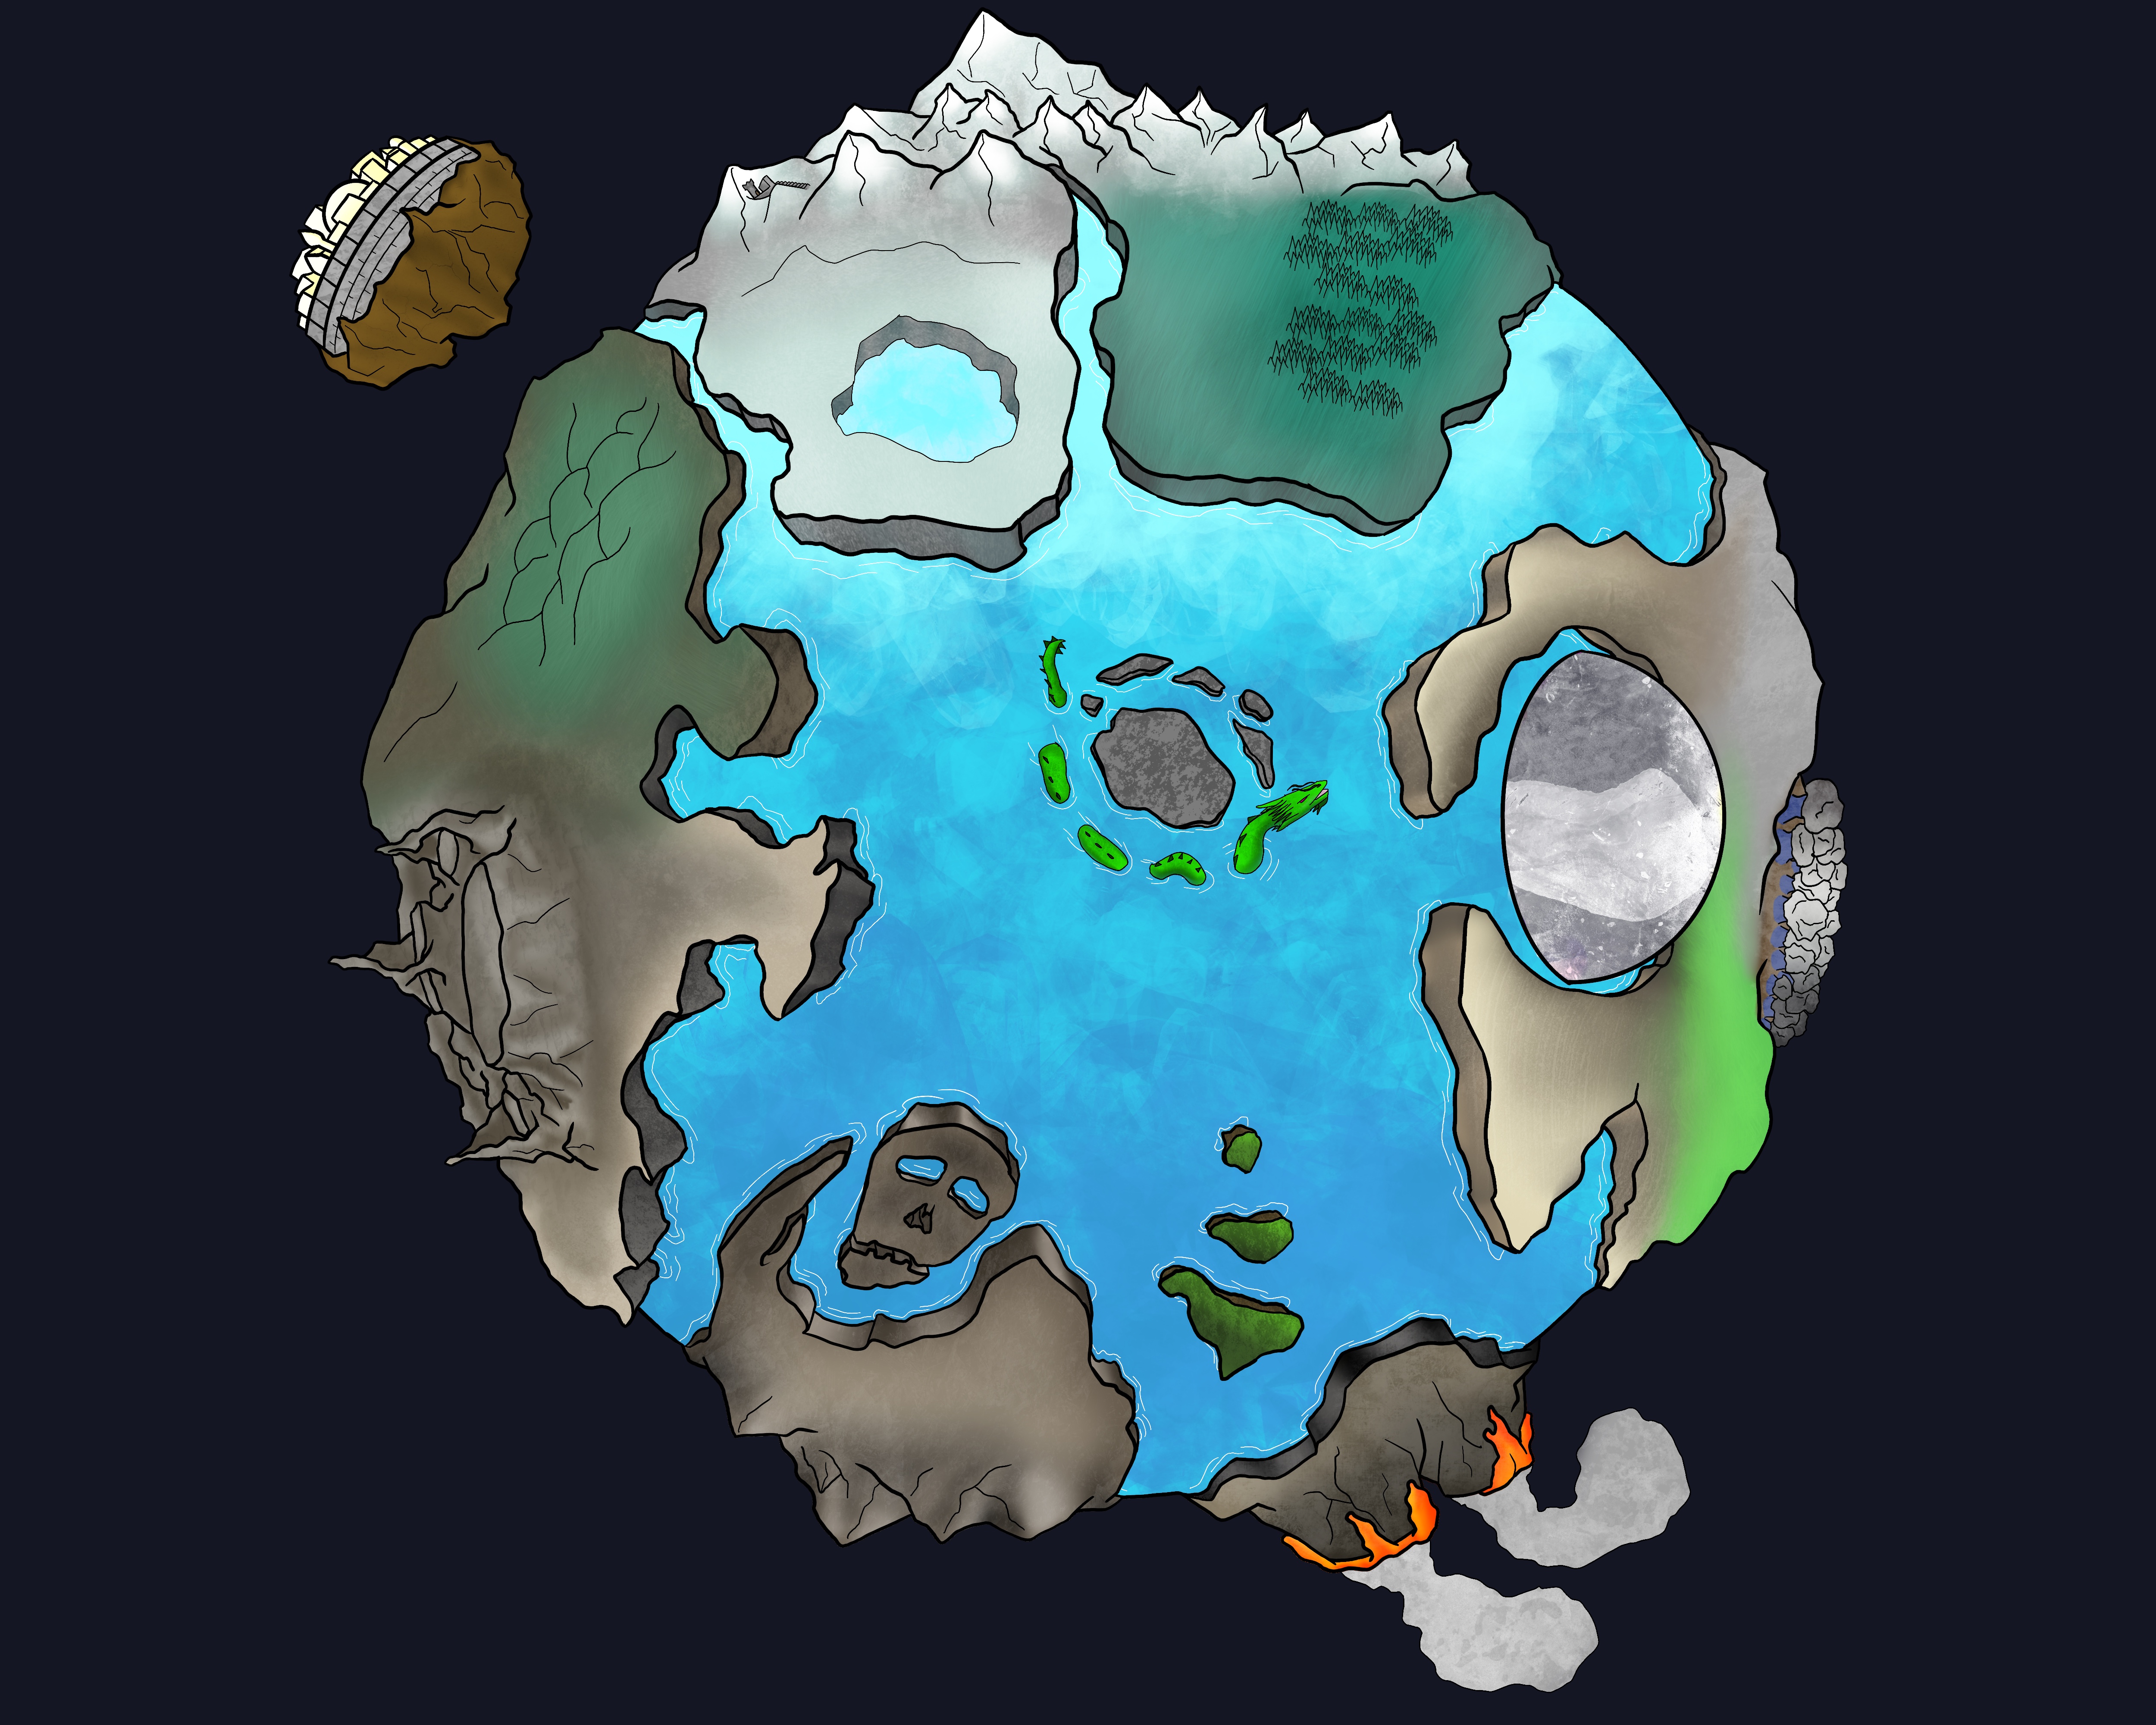 In my ever-expanding arsenal of fantasy map-making skills, I now include planetoids! This is the first time I started using other layers to mask in textures using specialty brushes. I really love how this turned out.